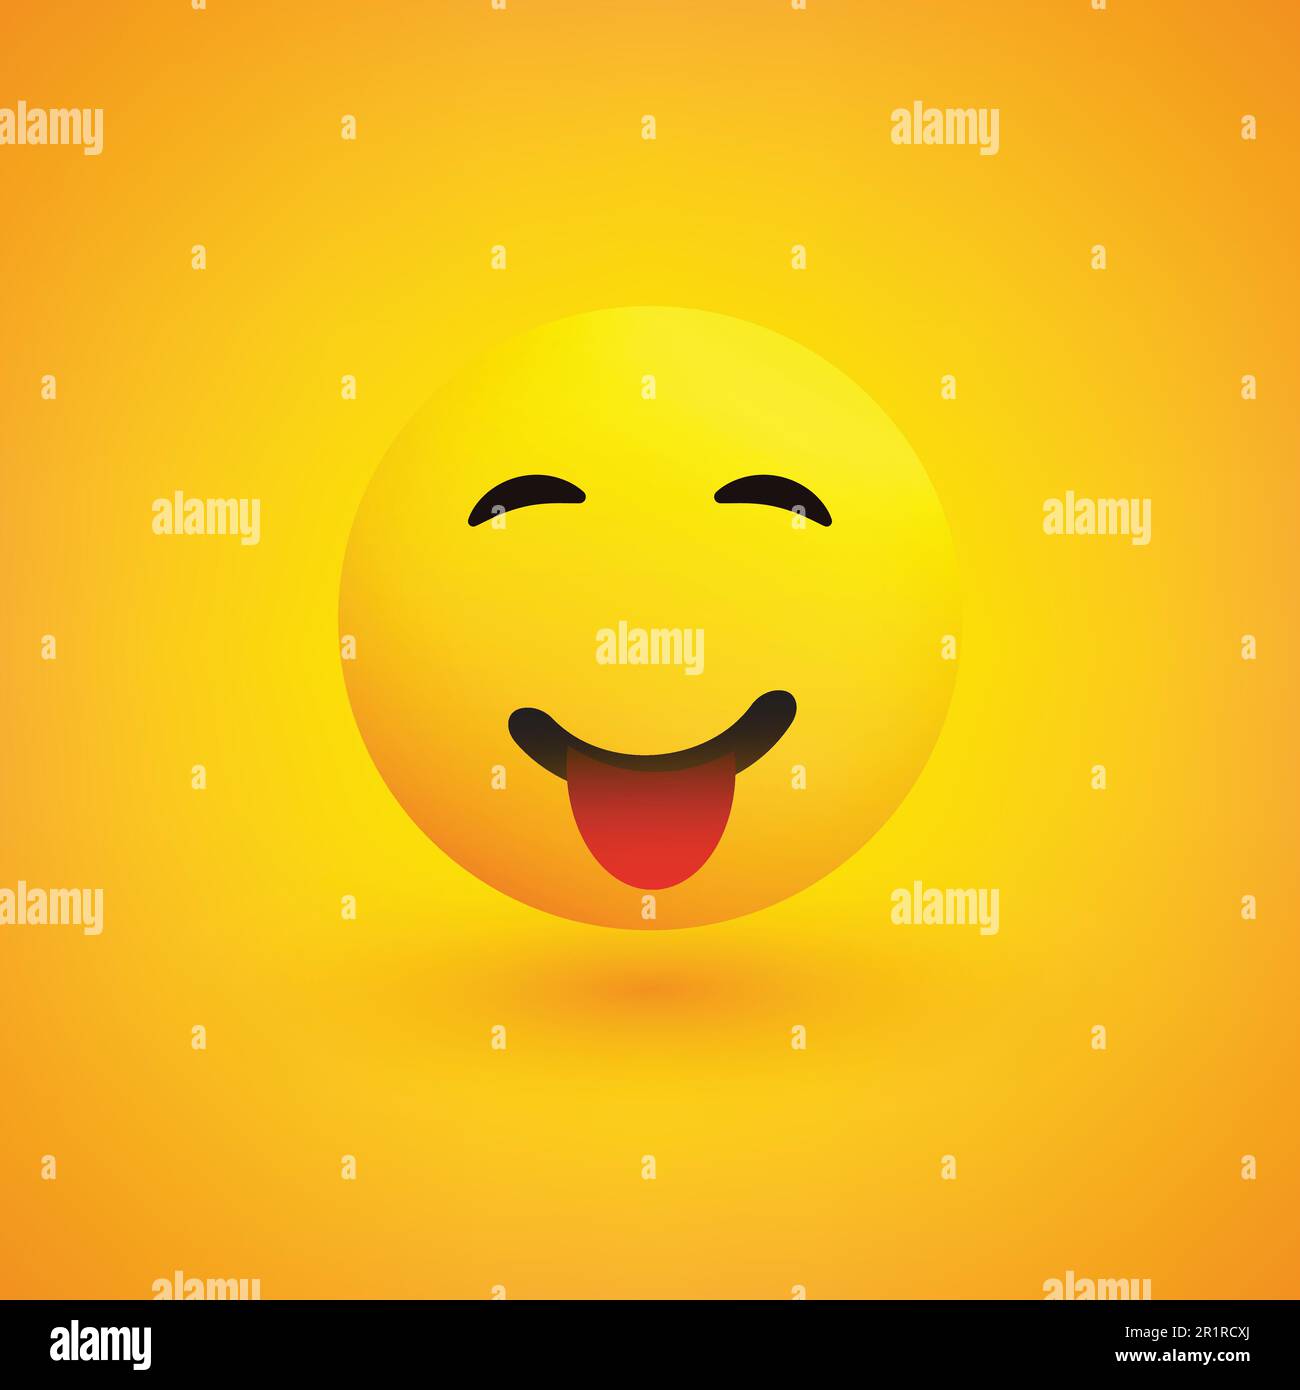 Smiling Emoji Face With Tongue - Simple Happy Emoticon on Yellow Background Stock Vector